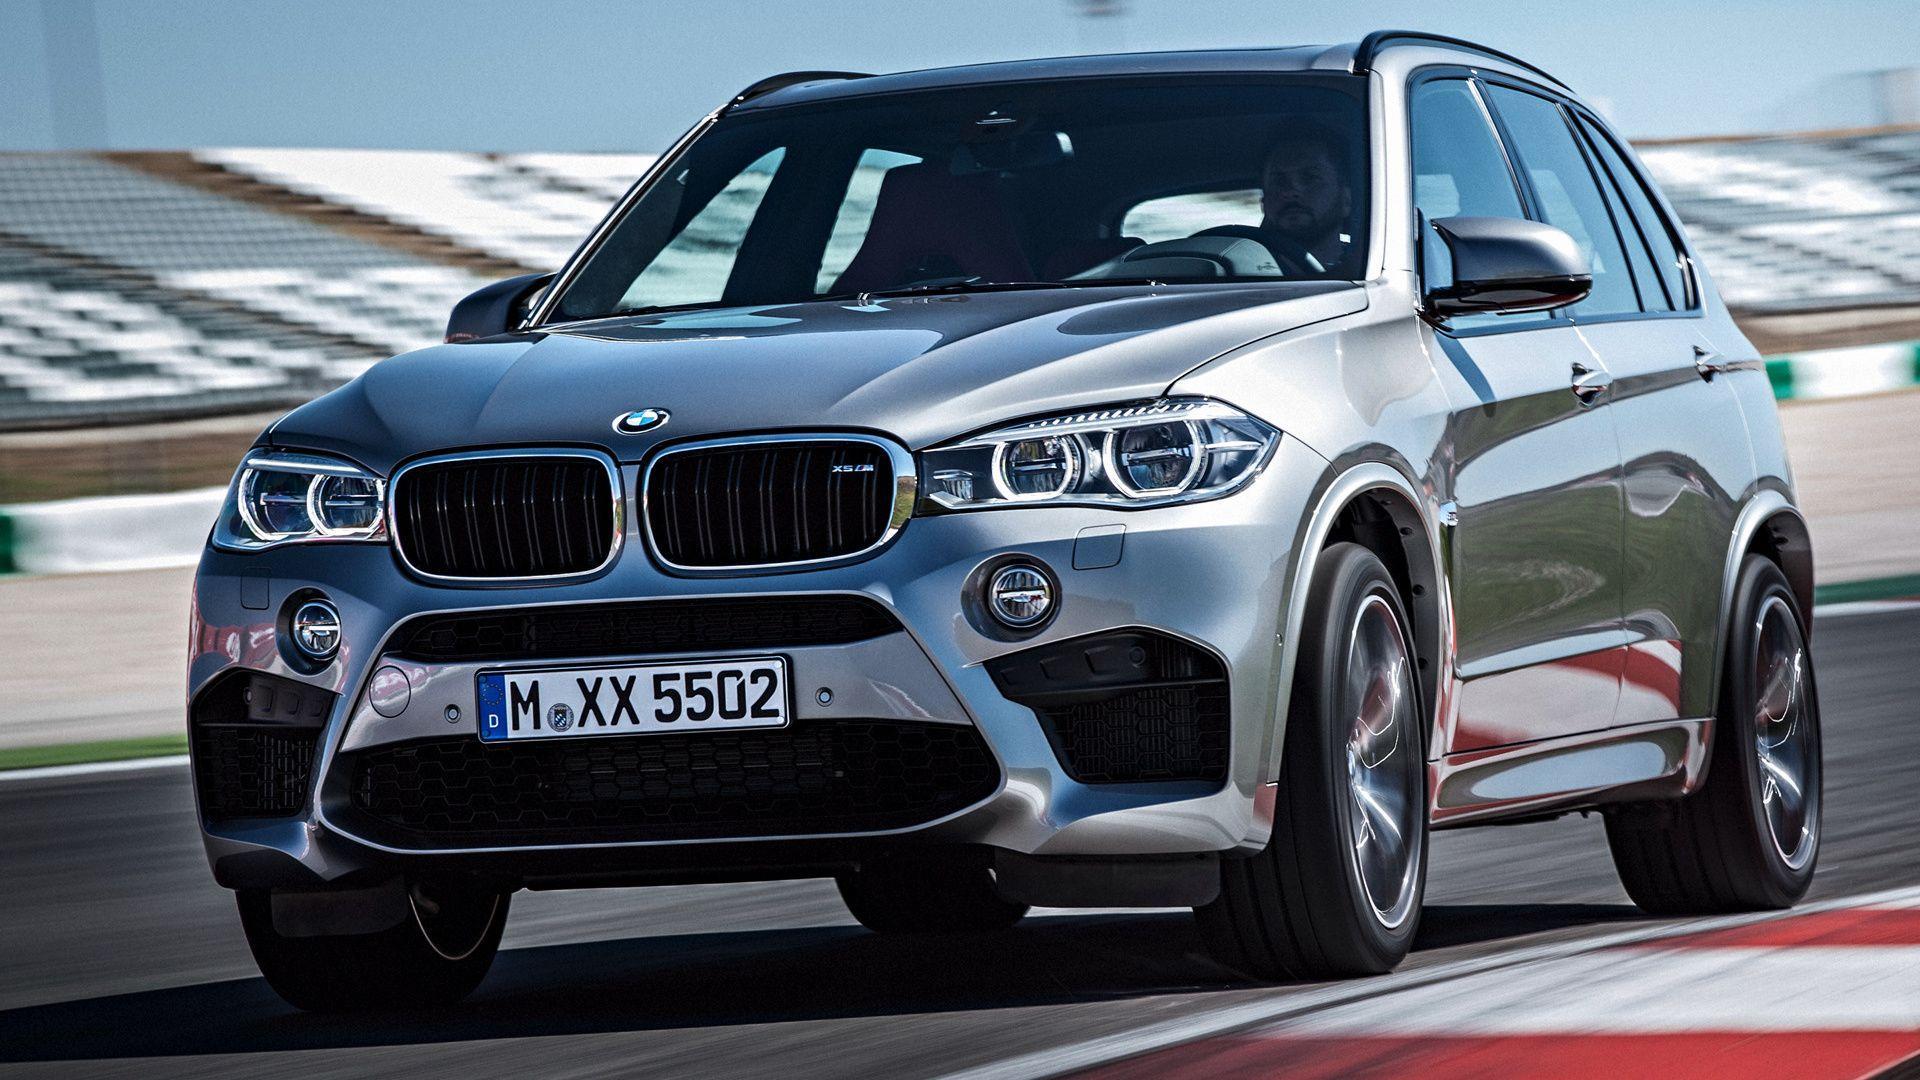 BMW X5 M (2015) Wallpaper and HD Image